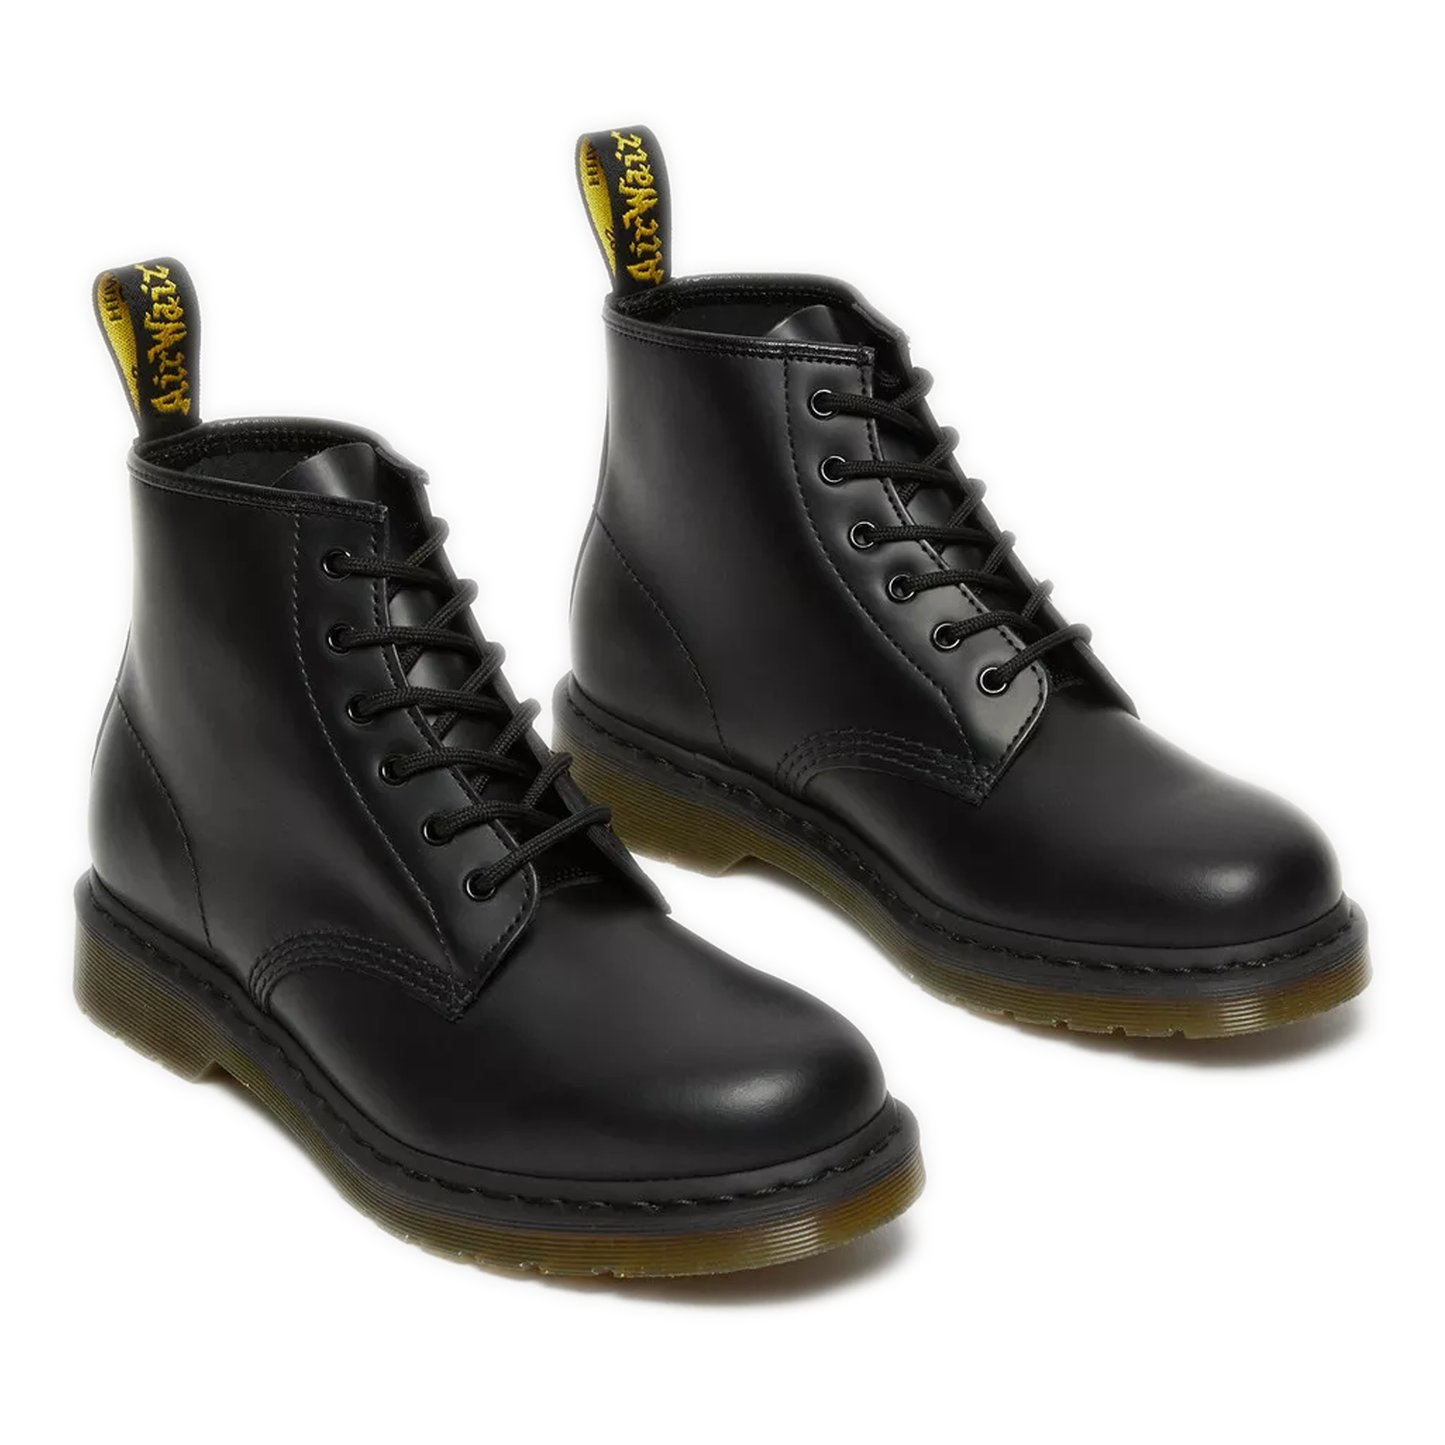 Women's Dr. Martens 101 Smooth Leather Ankle Boots - Black Smooth